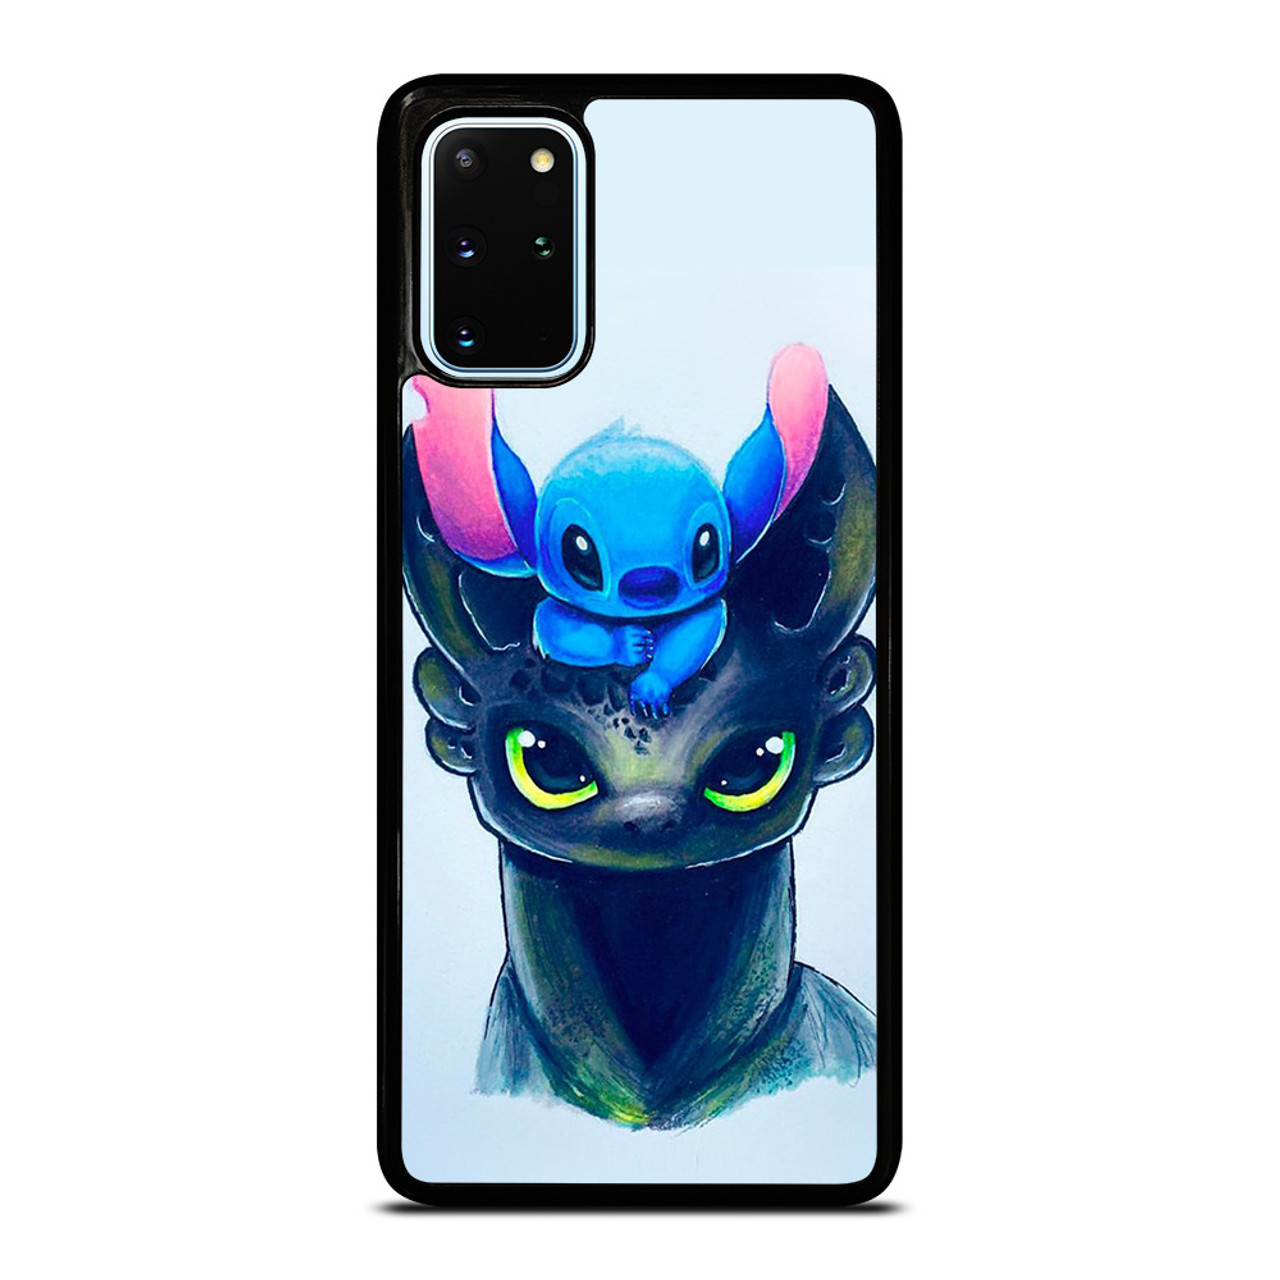 Fashion Stitch Hard TPU Toothless Dragon Designer Mobile Phone Cases for  iphone 13 pro max/iphone 12 pro max for Samsung Galaxy A10s 